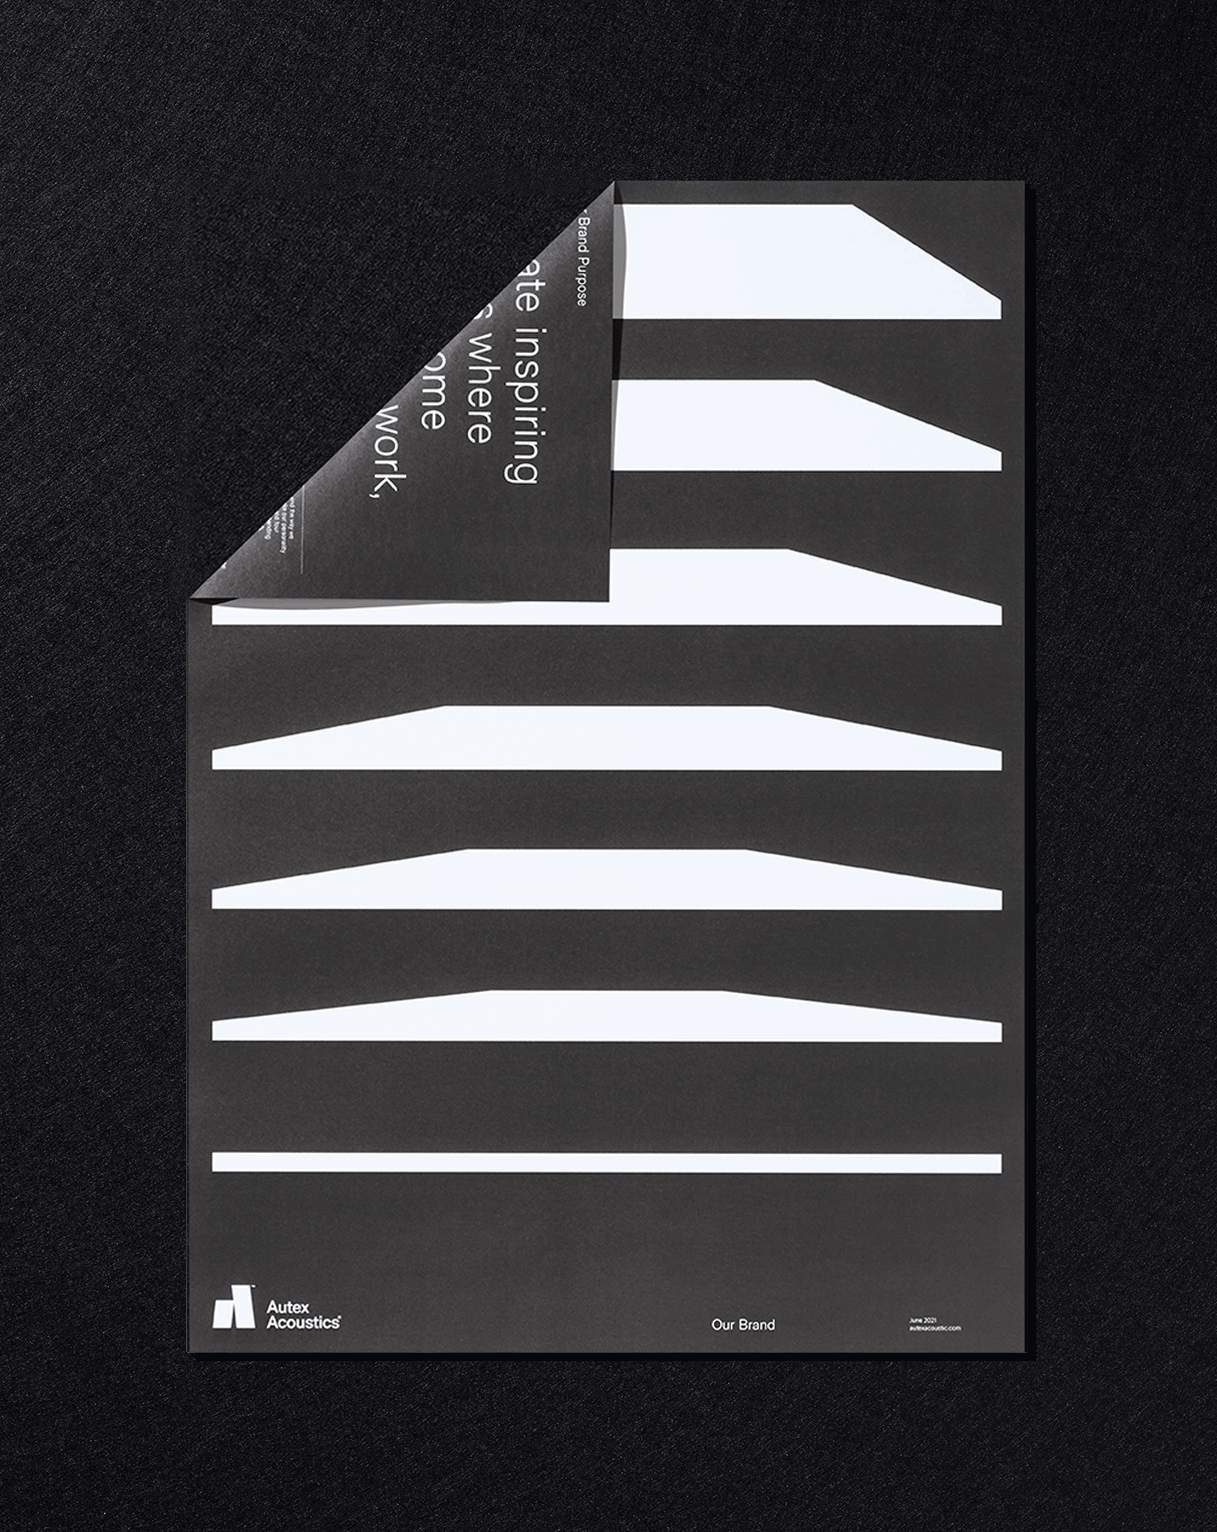 Brand identity and brand poster design for Autex Acoustics by Marx Design, New Zealand